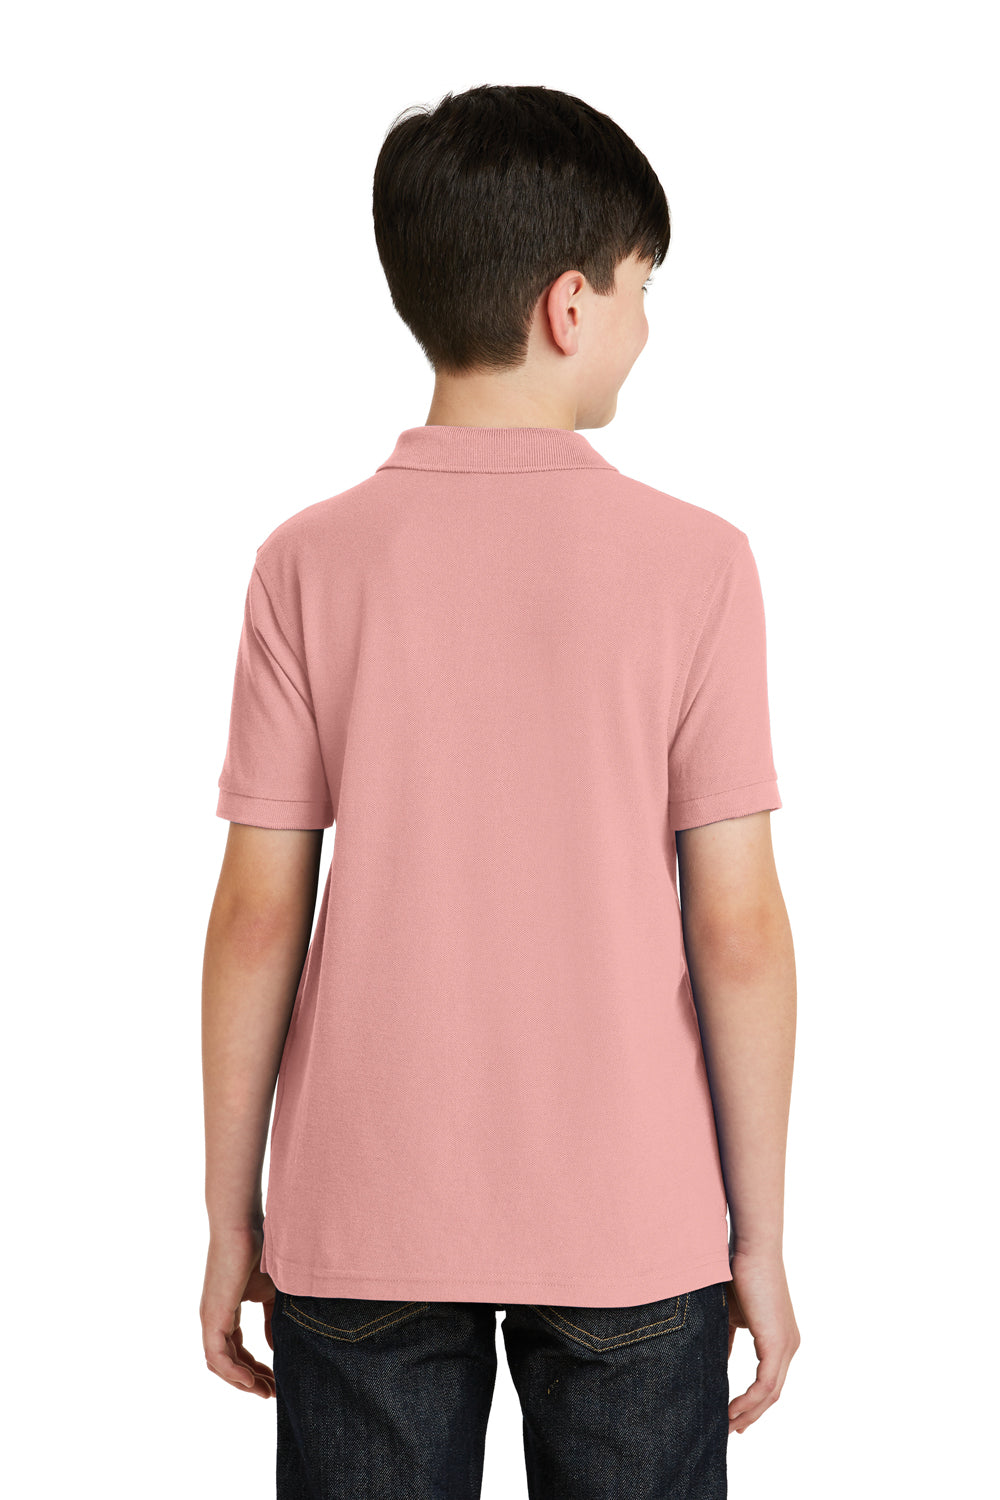 Port Authority Y500 Youth Silk Touch Wrinkle Resistant Short Sleeve Polo Shirt Light Pink Back